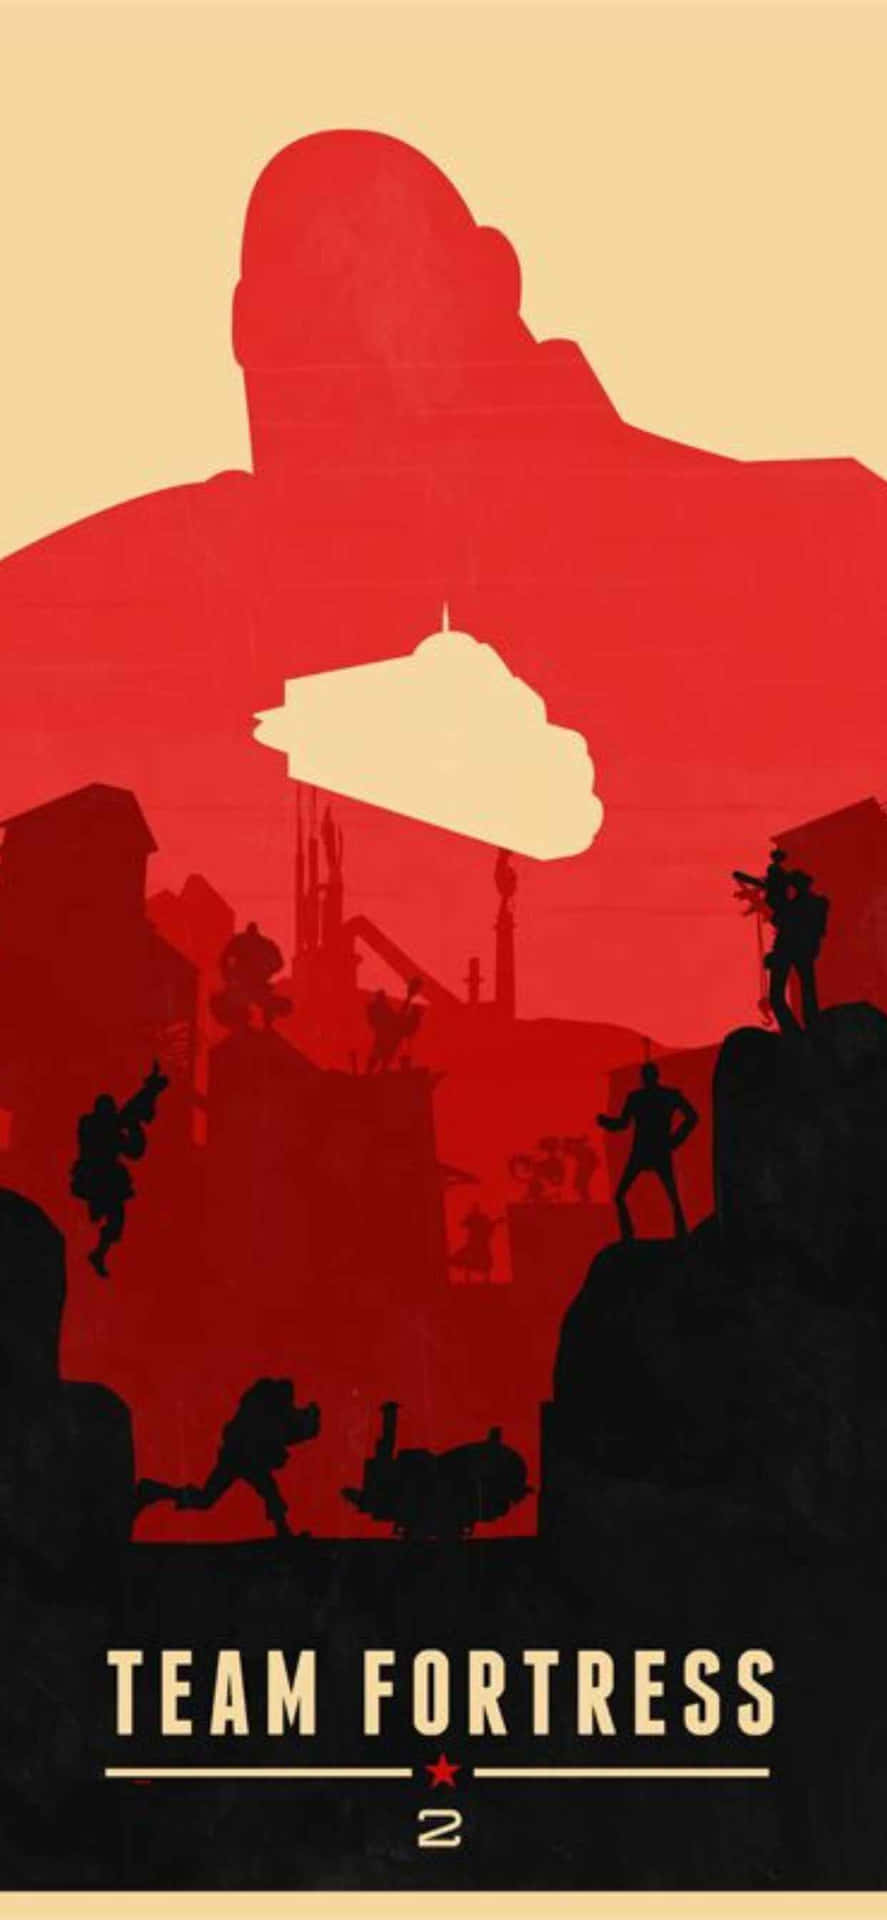 Banner Design Iphone Xs Max Team Fortress 2 Background